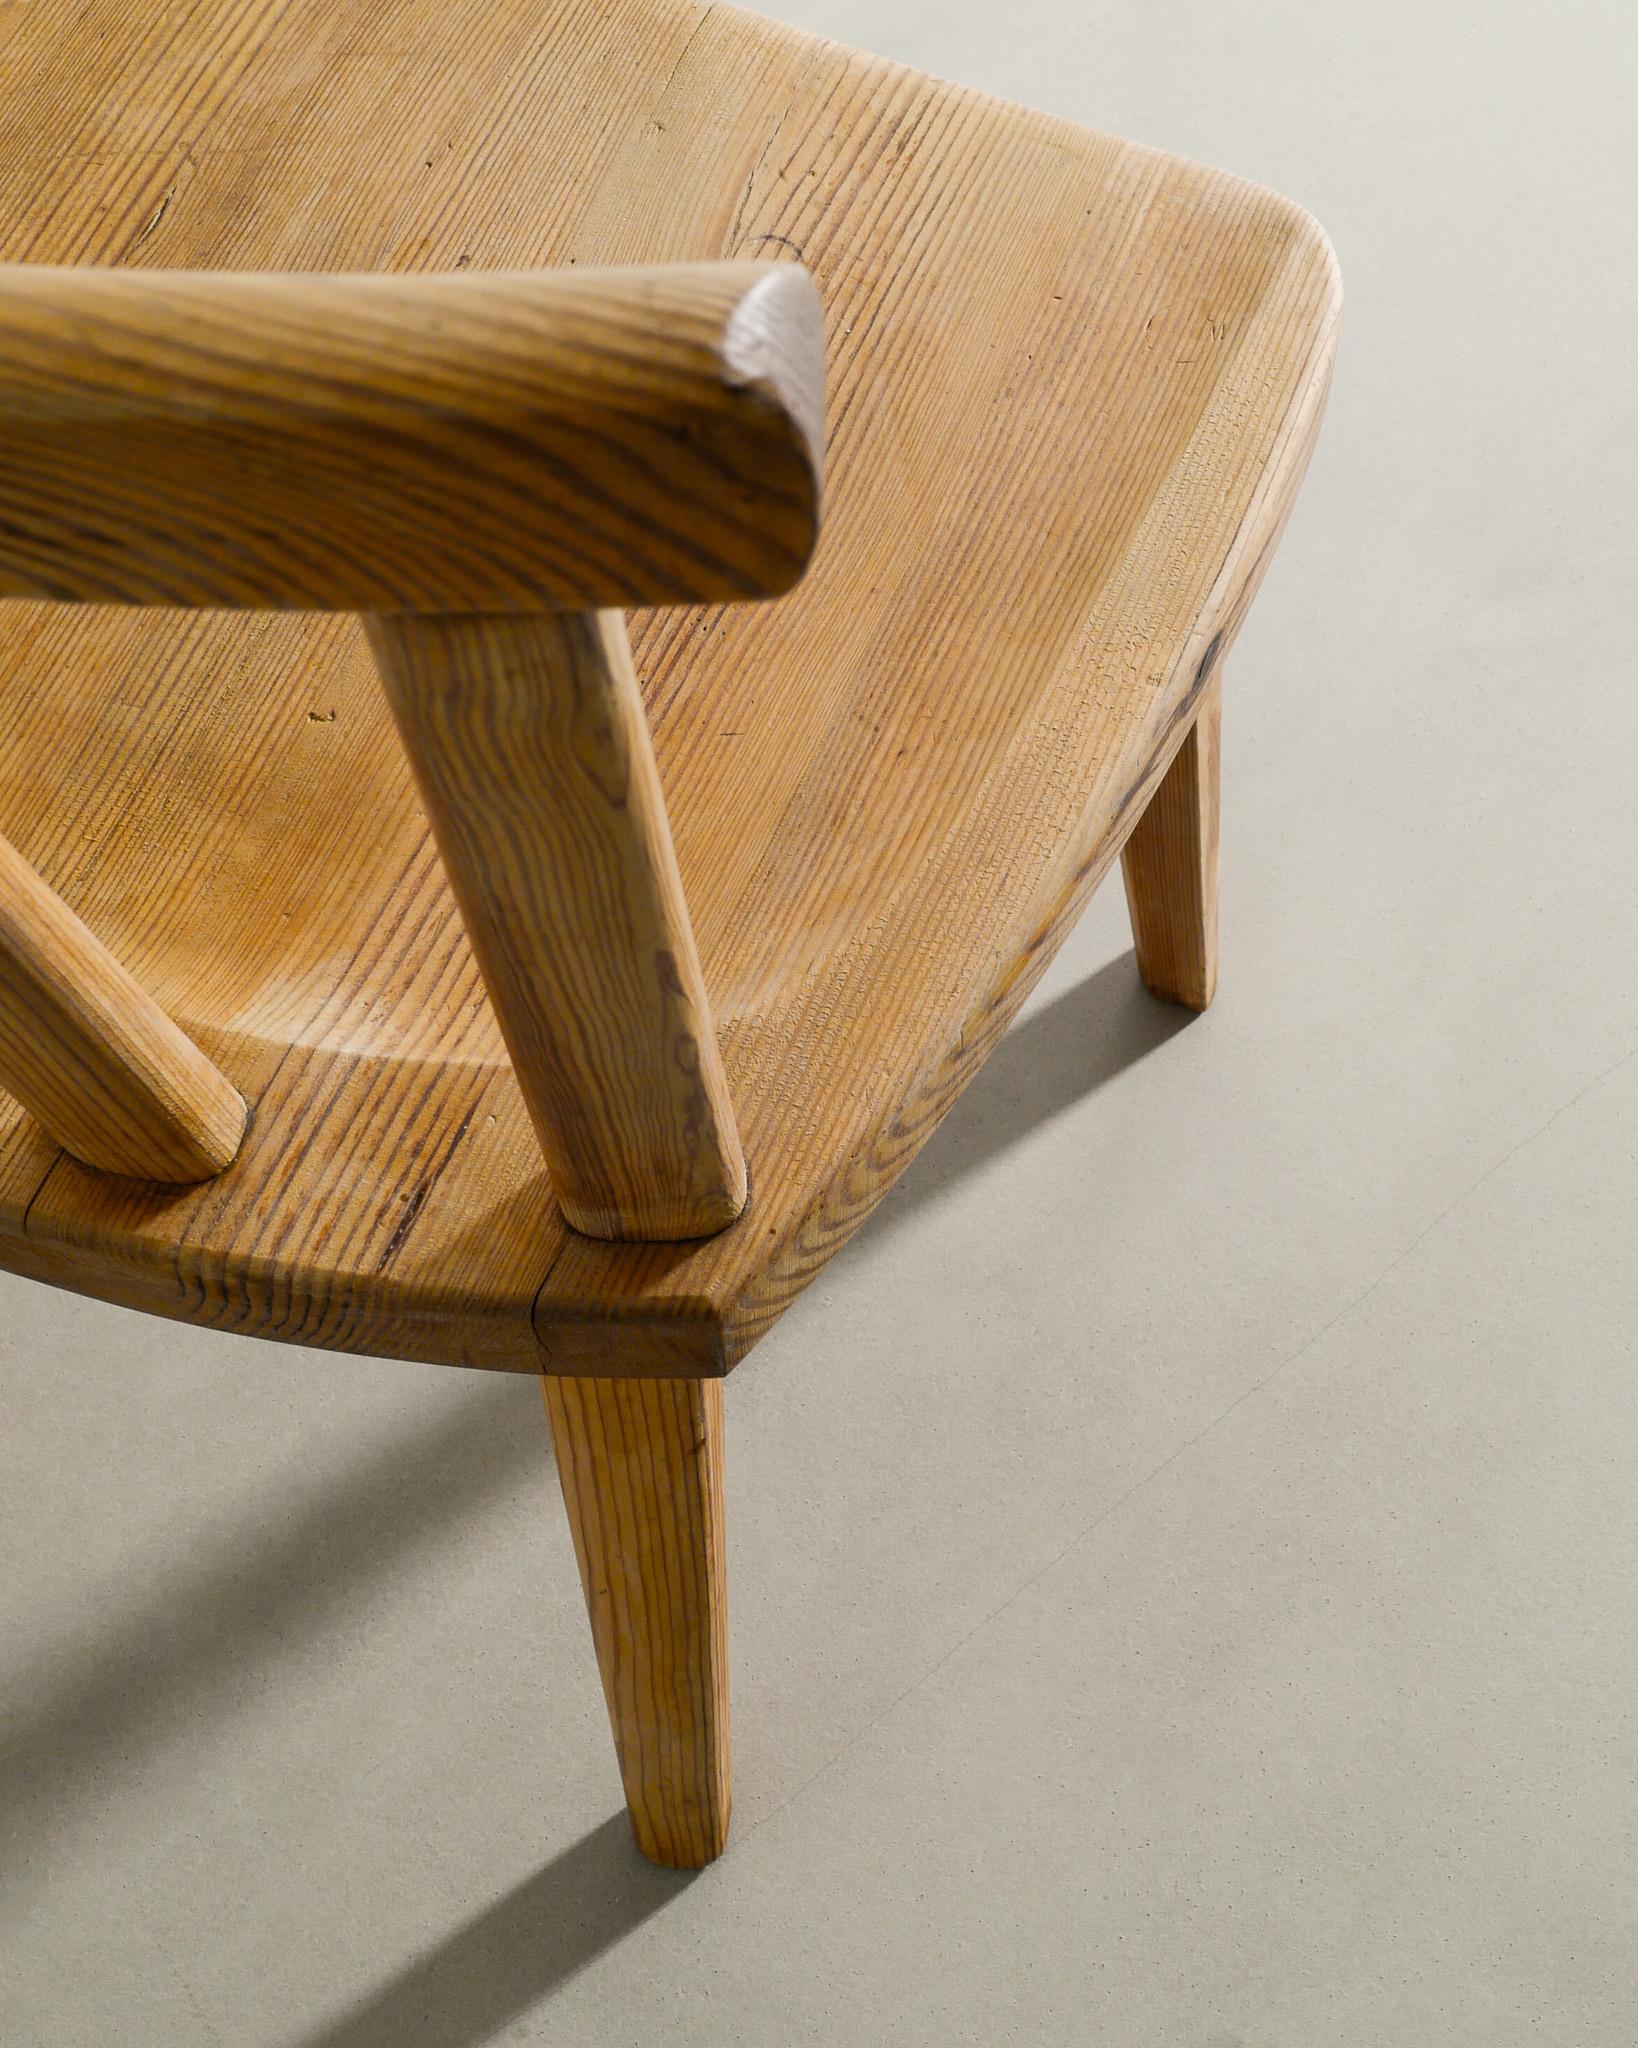 Swedish Single Wooden Dining Utö Chair in Pine by Axel Einar Hjorth for NK Sweden, 1932 For Sale